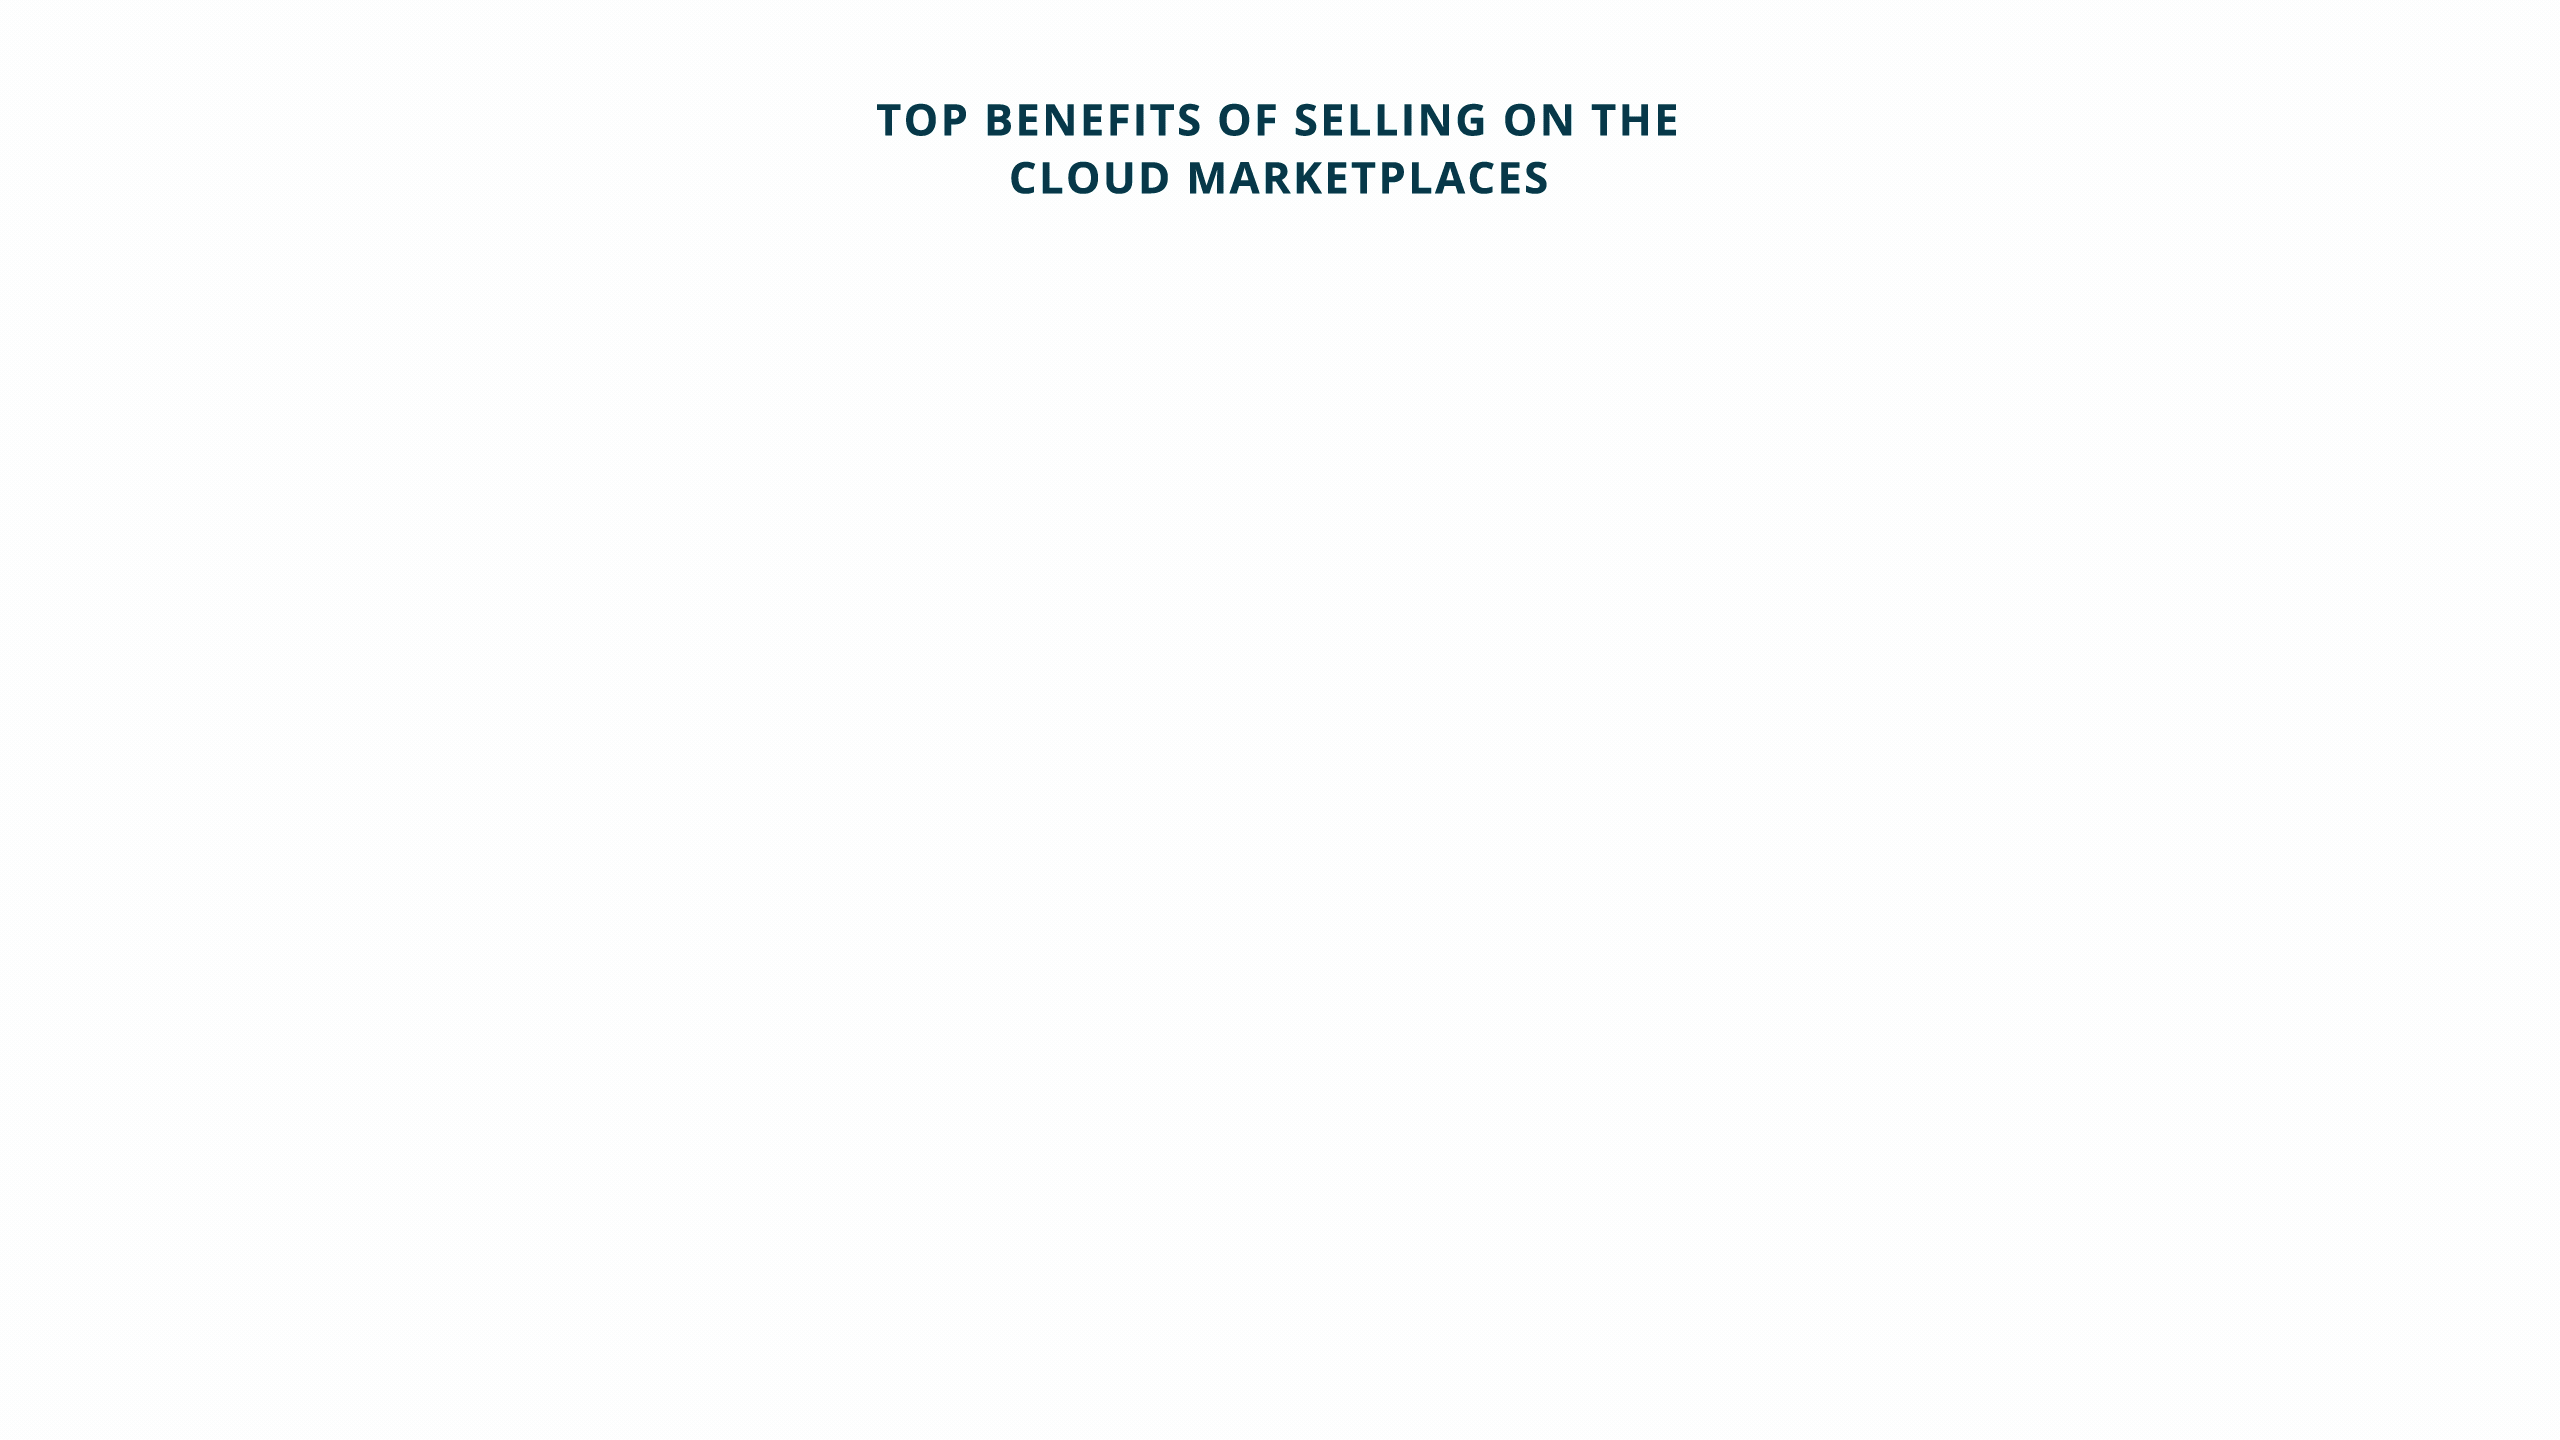 Top benefits of selling on the cloud marketplaces